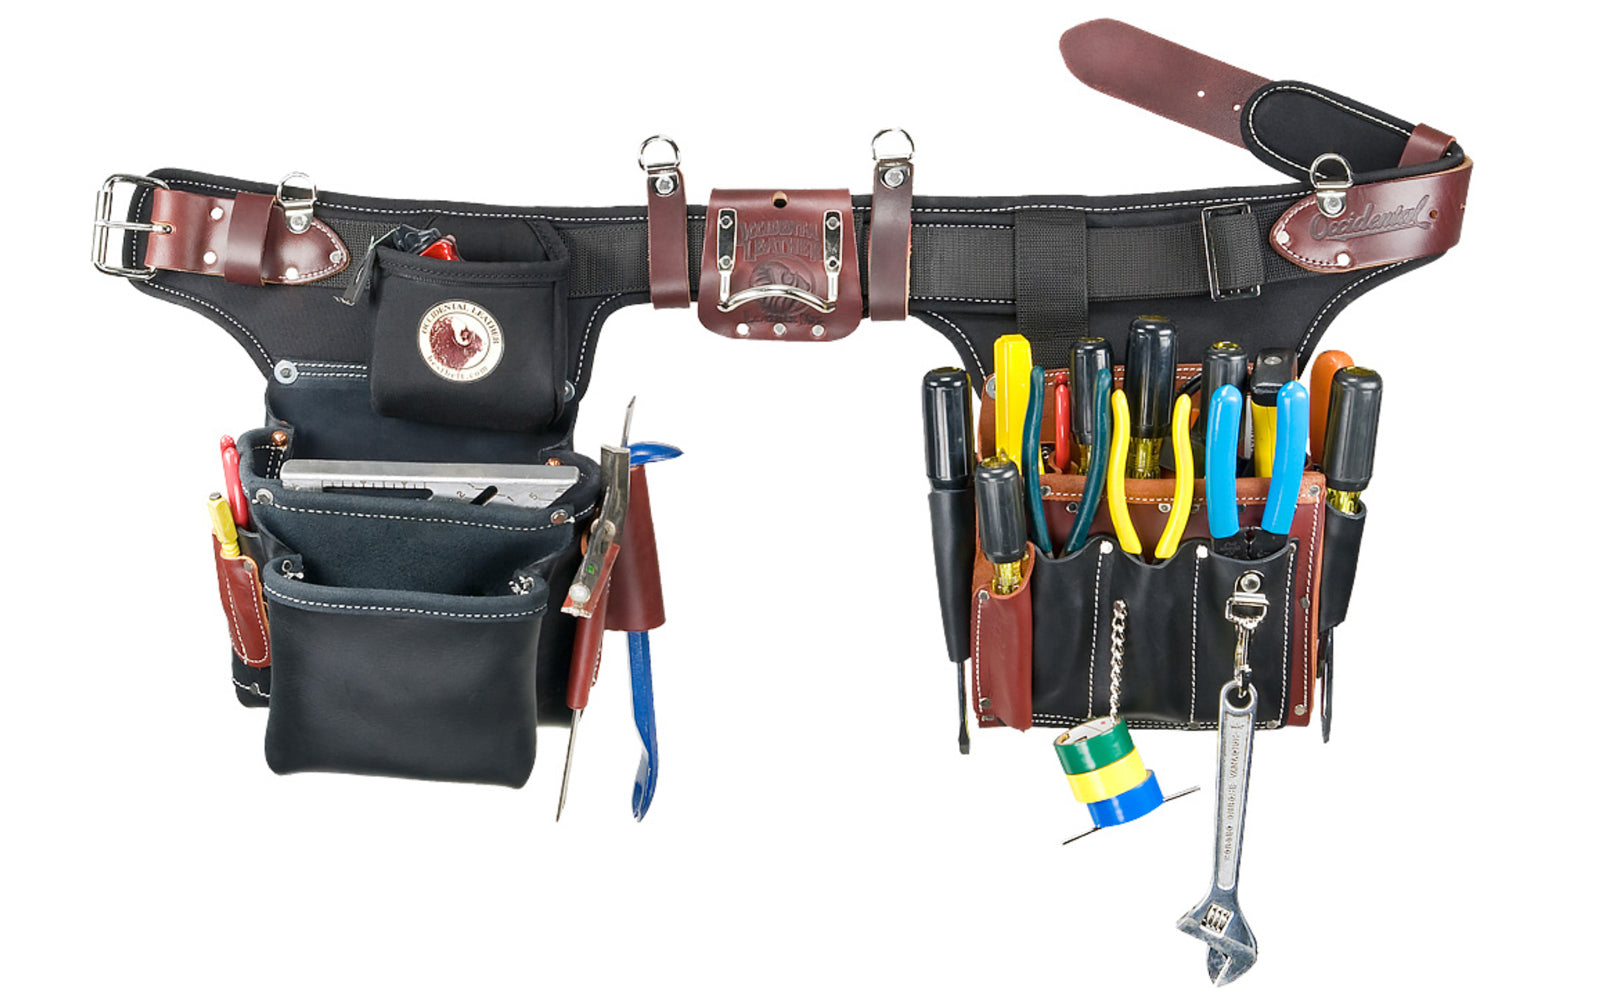 Occidental Leather Heritage "Adjust-To-Fit"  Industrial Pro Electrician Tool Belt - Package Set ~ 9596 - Premium Top-Grain Leather bags - 31 pockets - Fully Adjustable - Contracts to 32” Pant (35” Belt), Expands to 41” Pant (45” Belt). 759244308105. Industrial Nylon material. Made in USA - Electrician tool bag set